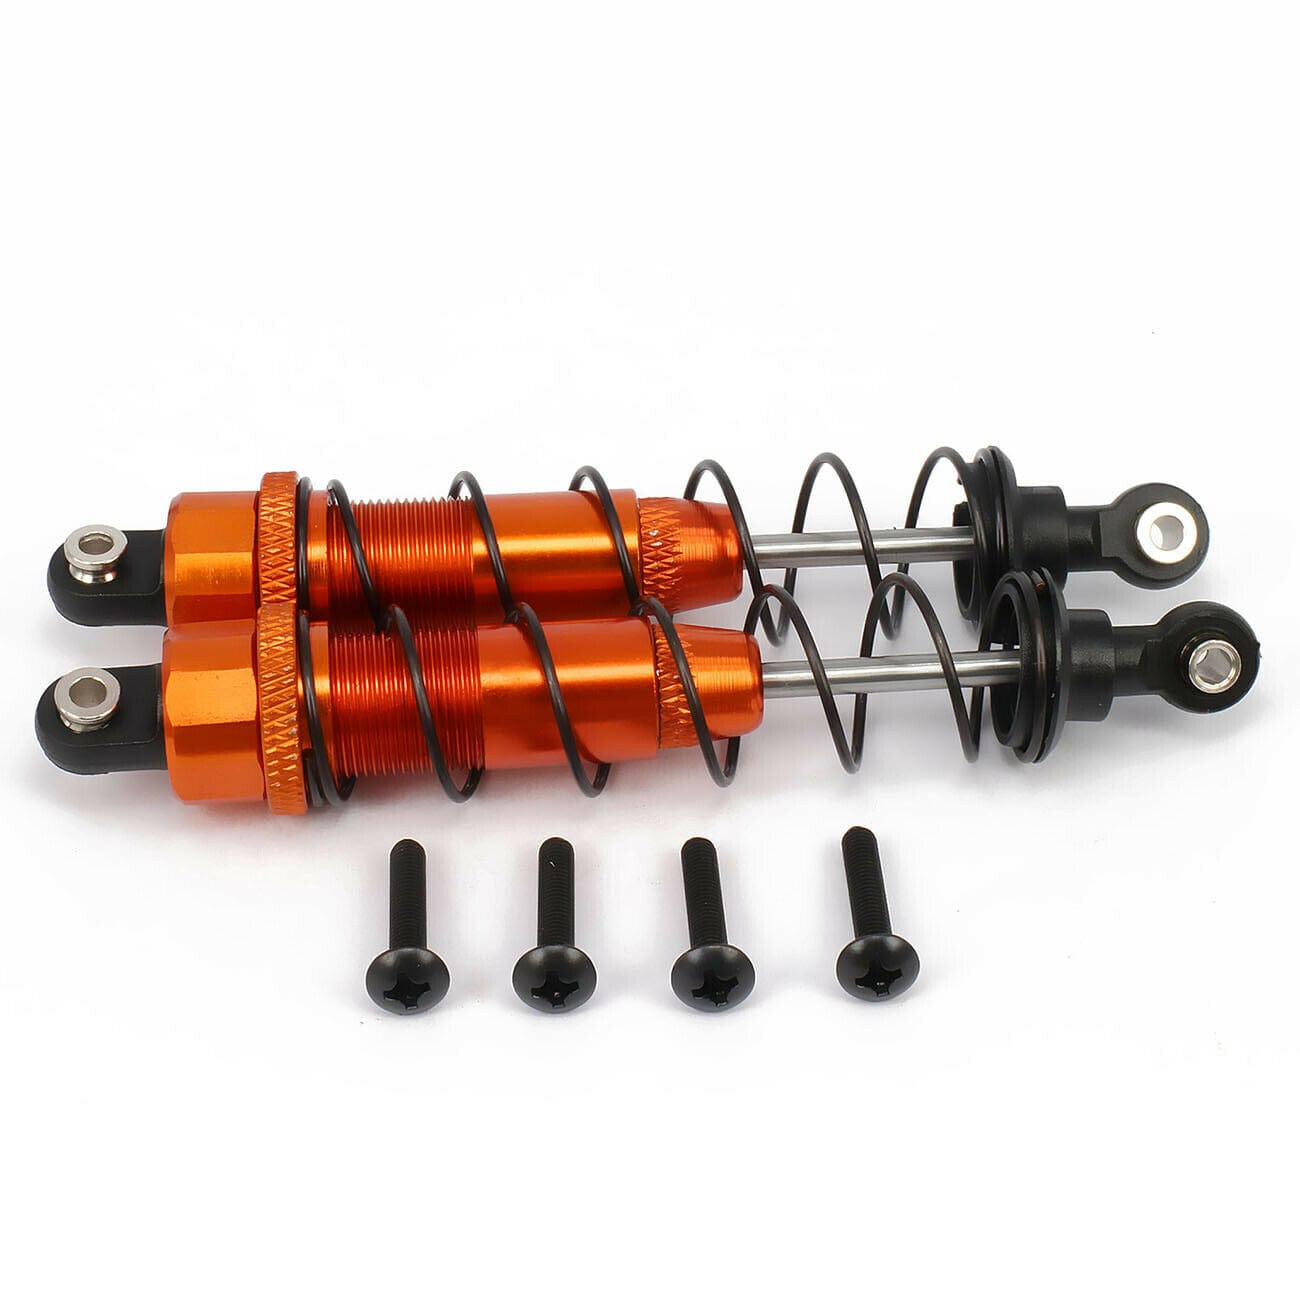 RCAWD AXIAL UPGRADE PARTS Orange 100mm RC Shock Absorber Damper For Rc Model Car 1/10 Axial Scx10